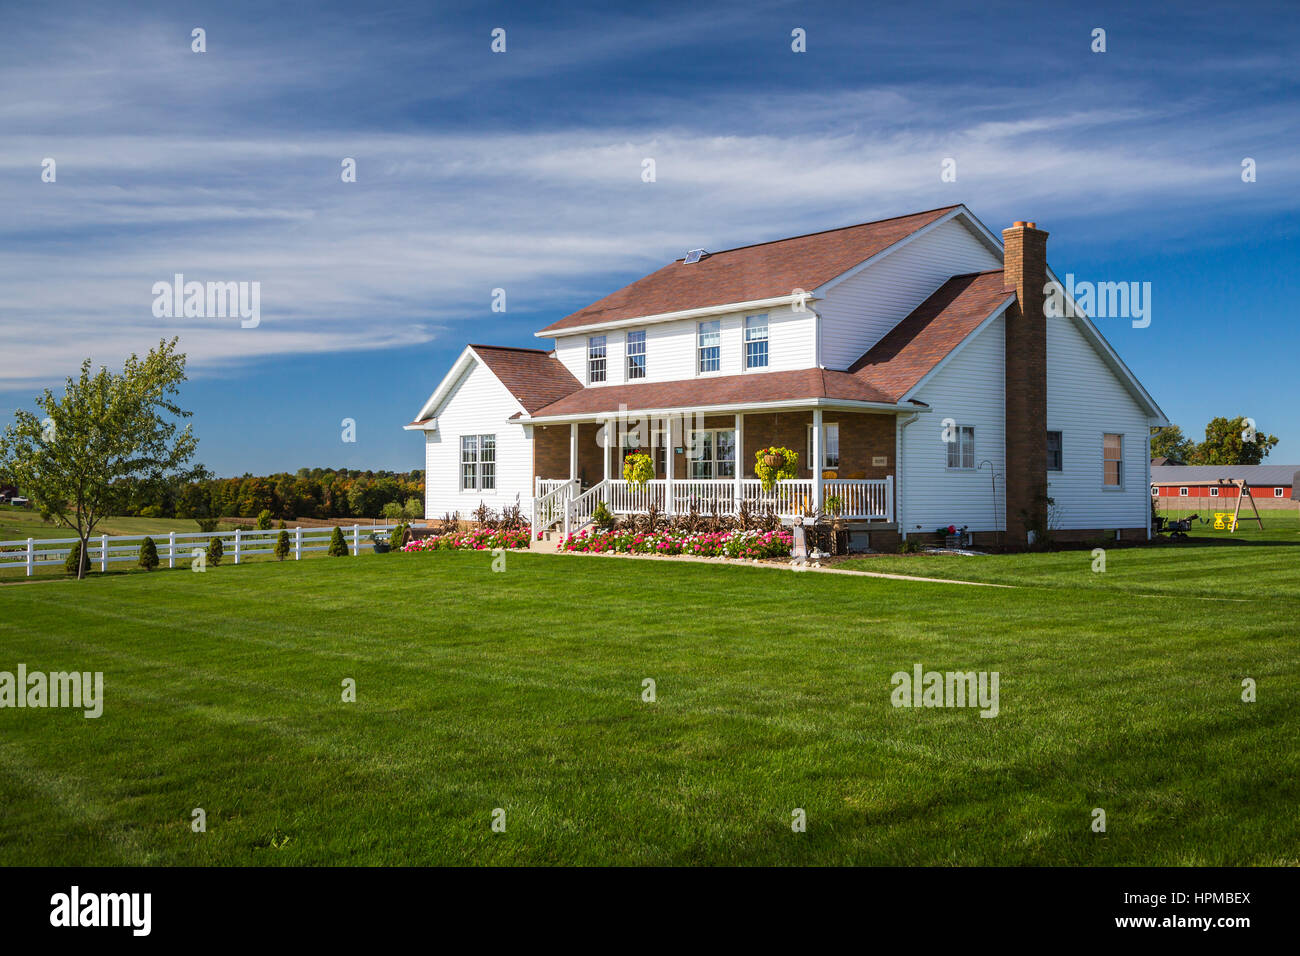 A rural home in Amish country near Mt. Eaton, Ohio, USA. Stock Photo